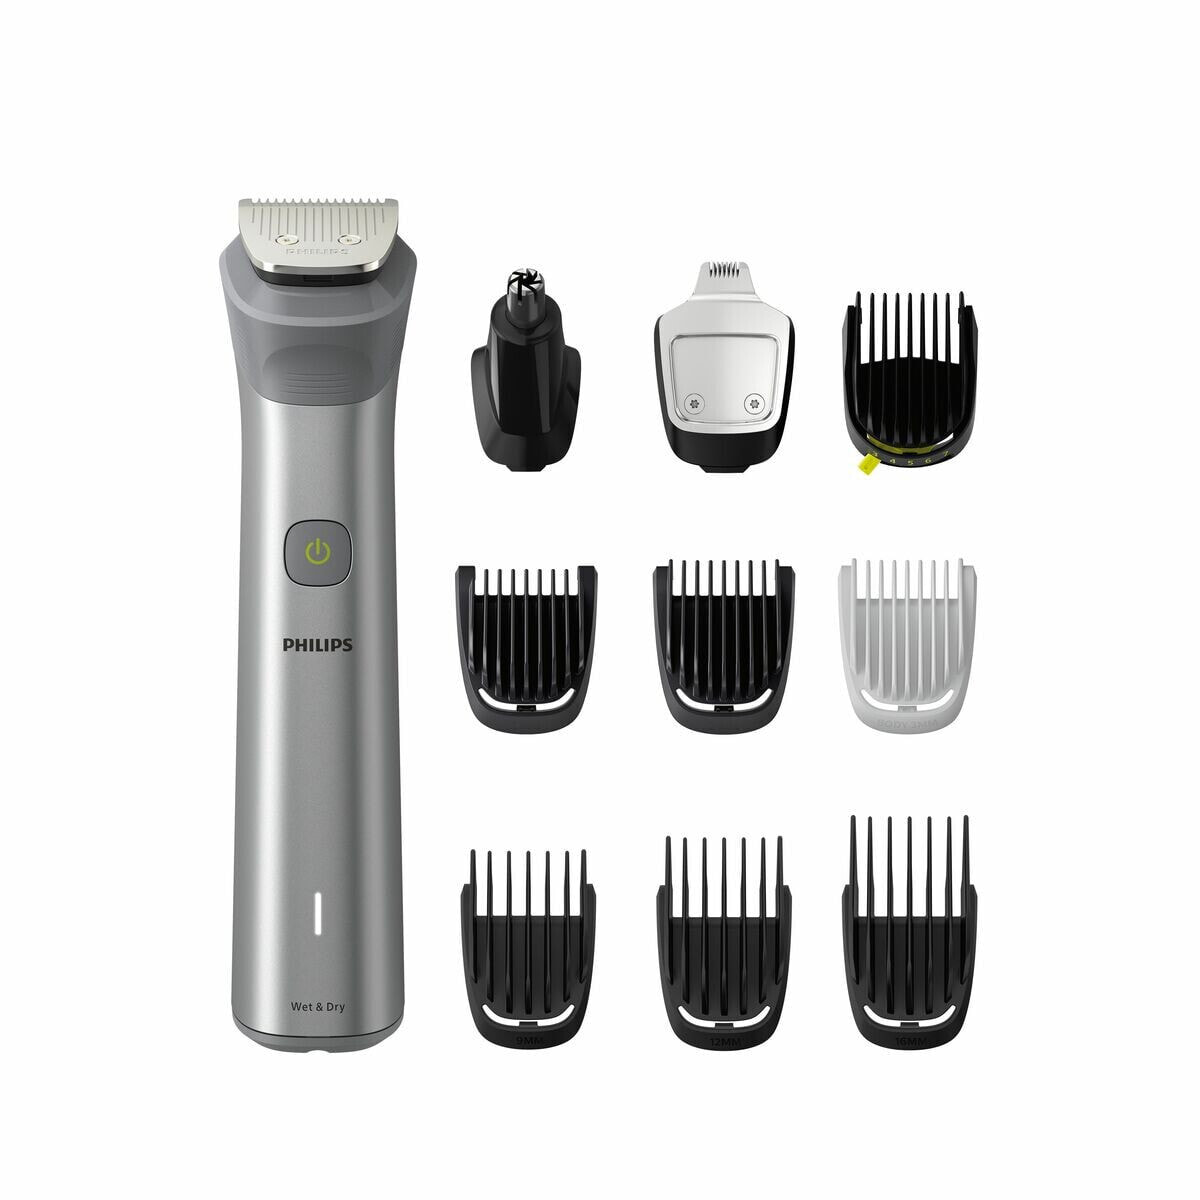 Electric shaver Philips MG5920/15